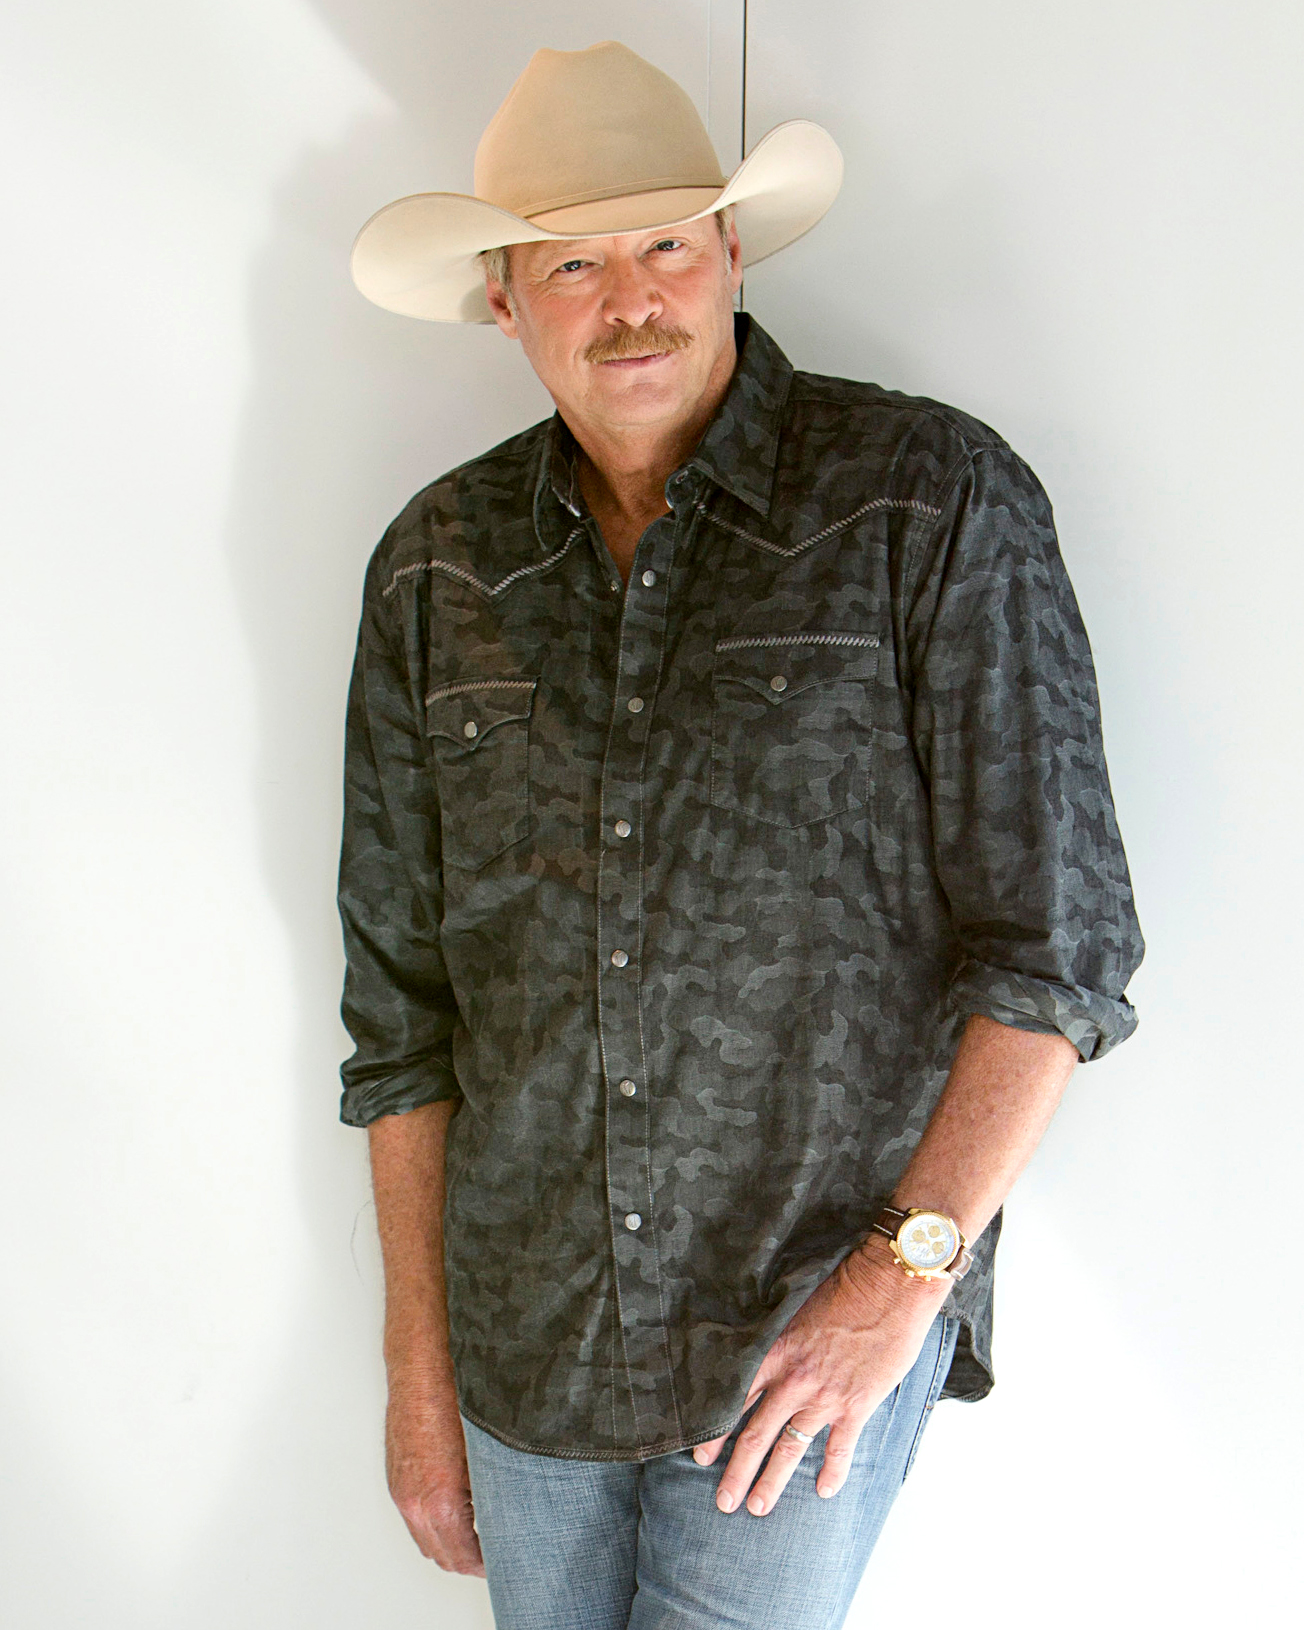 Country star Alan Jackson reveals CMT diagnosis - TODAY